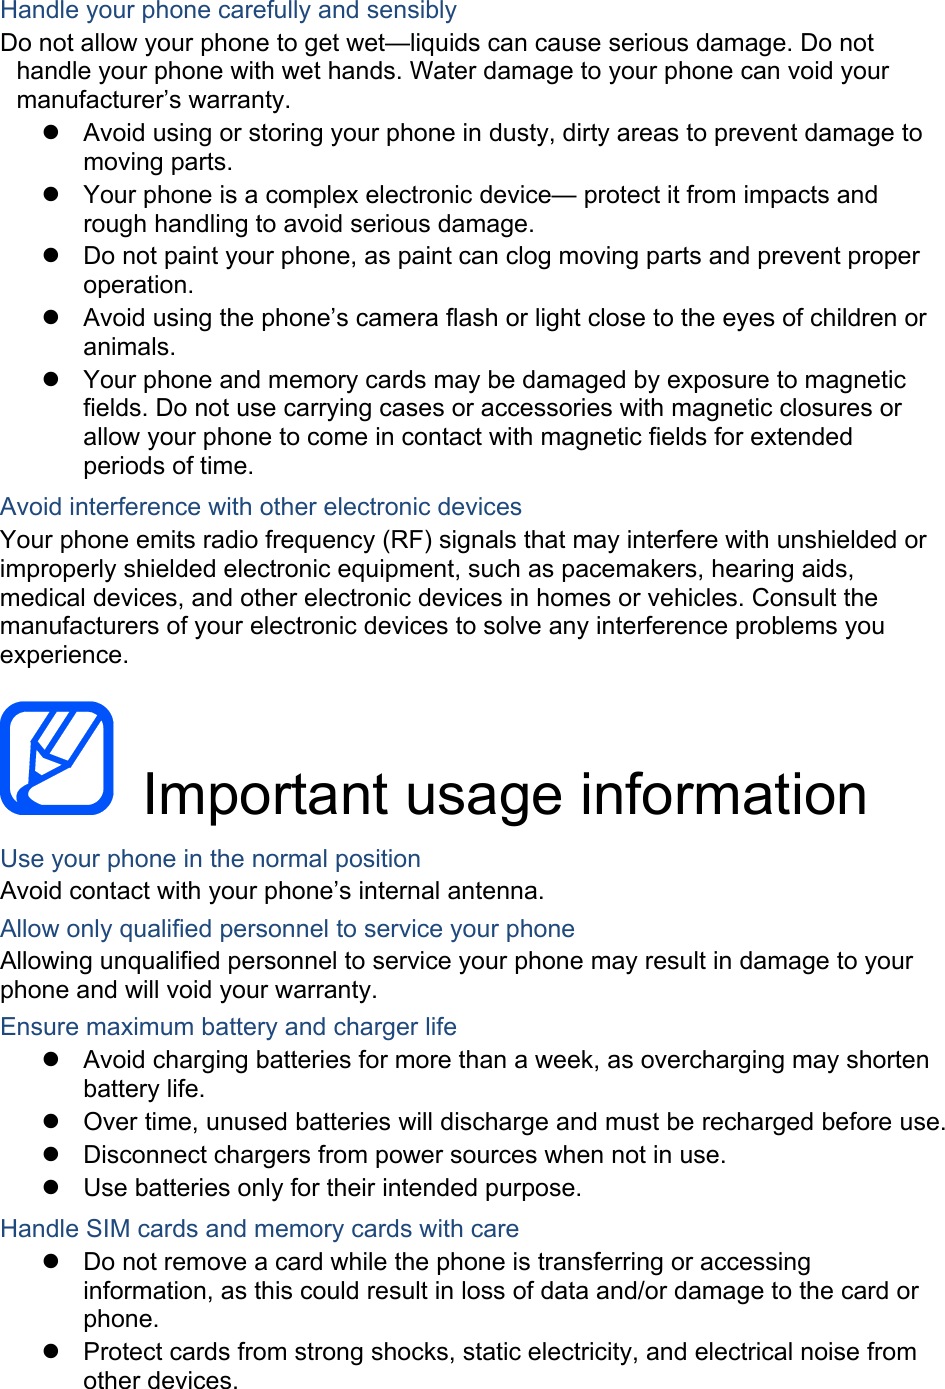 Handle your phone carefully and sensibly Do not allow your phone to get wet—liquids can cause serious damage. Do not handle your phone with wet hands. Water damage to your phone can void your manufacturer’s warranty.   Avoid using or storing your phone in dusty, dirty areas to prevent damage to moving parts.   Your phone is a complex electronic device— protect it from impacts and rough handling to avoid serious damage.   Do not paint your phone, as paint can clog moving parts and prevent proper operation.   Avoid using the phone’s camera flash or light close to the eyes of children or animals.   Your phone and memory cards may be damaged by exposure to magnetic fields. Do not use carrying cases or accessories with magnetic closures or allow your phone to come in contact with magnetic fields for extended periods of time. Avoid interference with other electronic devices Your phone emits radio frequency (RF) signals that may interfere with unshielded or improperly shielded electronic equipment, such as pacemakers, hearing aids, medical devices, and other electronic devices in homes or vehicles. Consult the manufacturers of your electronic devices to solve any interference problems you experience.   Important usage information Use your phone in the normal position Avoid contact with your phone’s internal antenna. Allow only qualified personnel to service your phone Allowing unqualified personnel to service your phone may result in damage to your phone and will void your warranty. Ensure maximum battery and charger life   Avoid charging batteries for more than a week, as overcharging may shorten battery life.   Over time, unused batteries will discharge and must be recharged before use.   Disconnect chargers from power sources when not in use.   Use batteries only for their intended purpose. Handle SIM cards and memory cards with care   Do not remove a card while the phone is transferring or accessing information, as this could result in loss of data and/or damage to the card or phone.   Protect cards from strong shocks, static electricity, and electrical noise from other devices. 